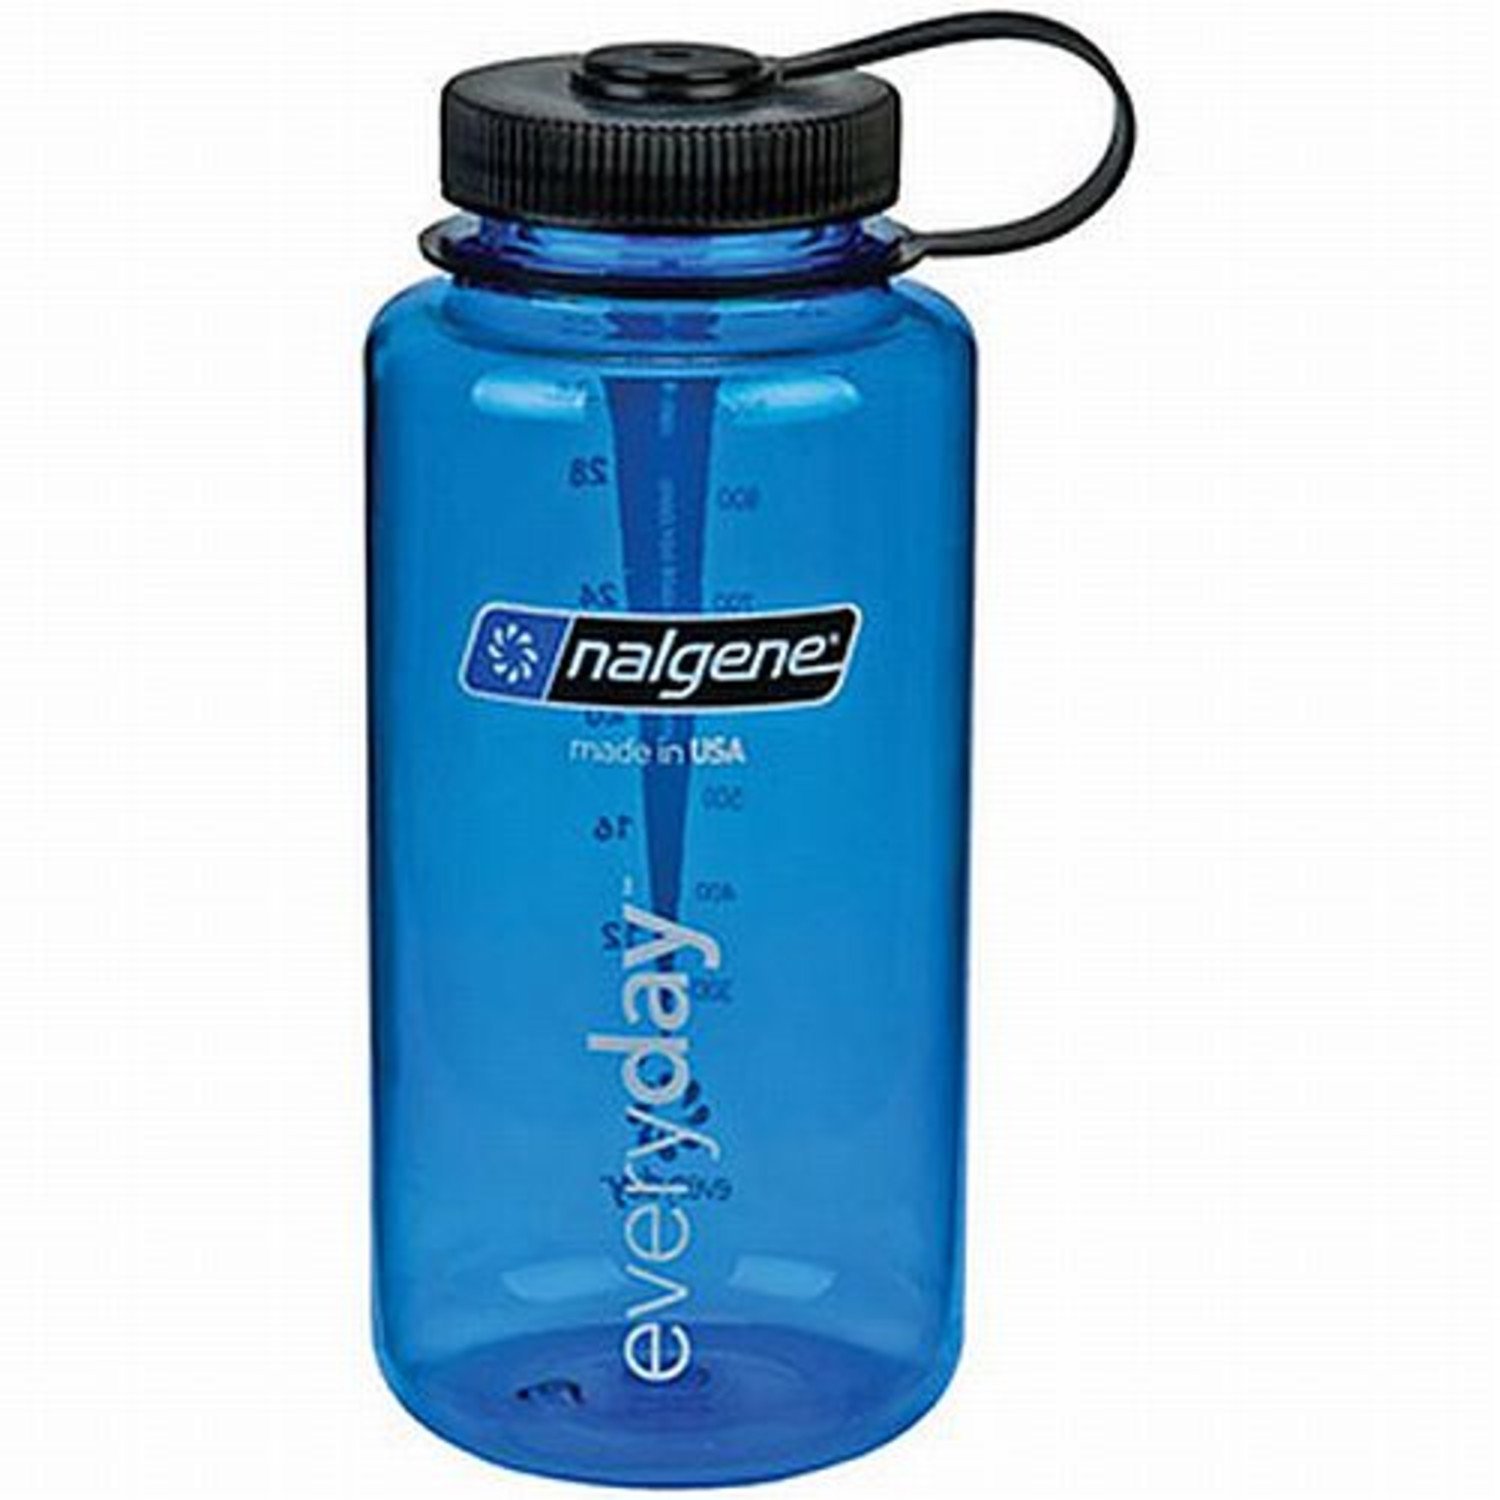 The Original water bottle. Th